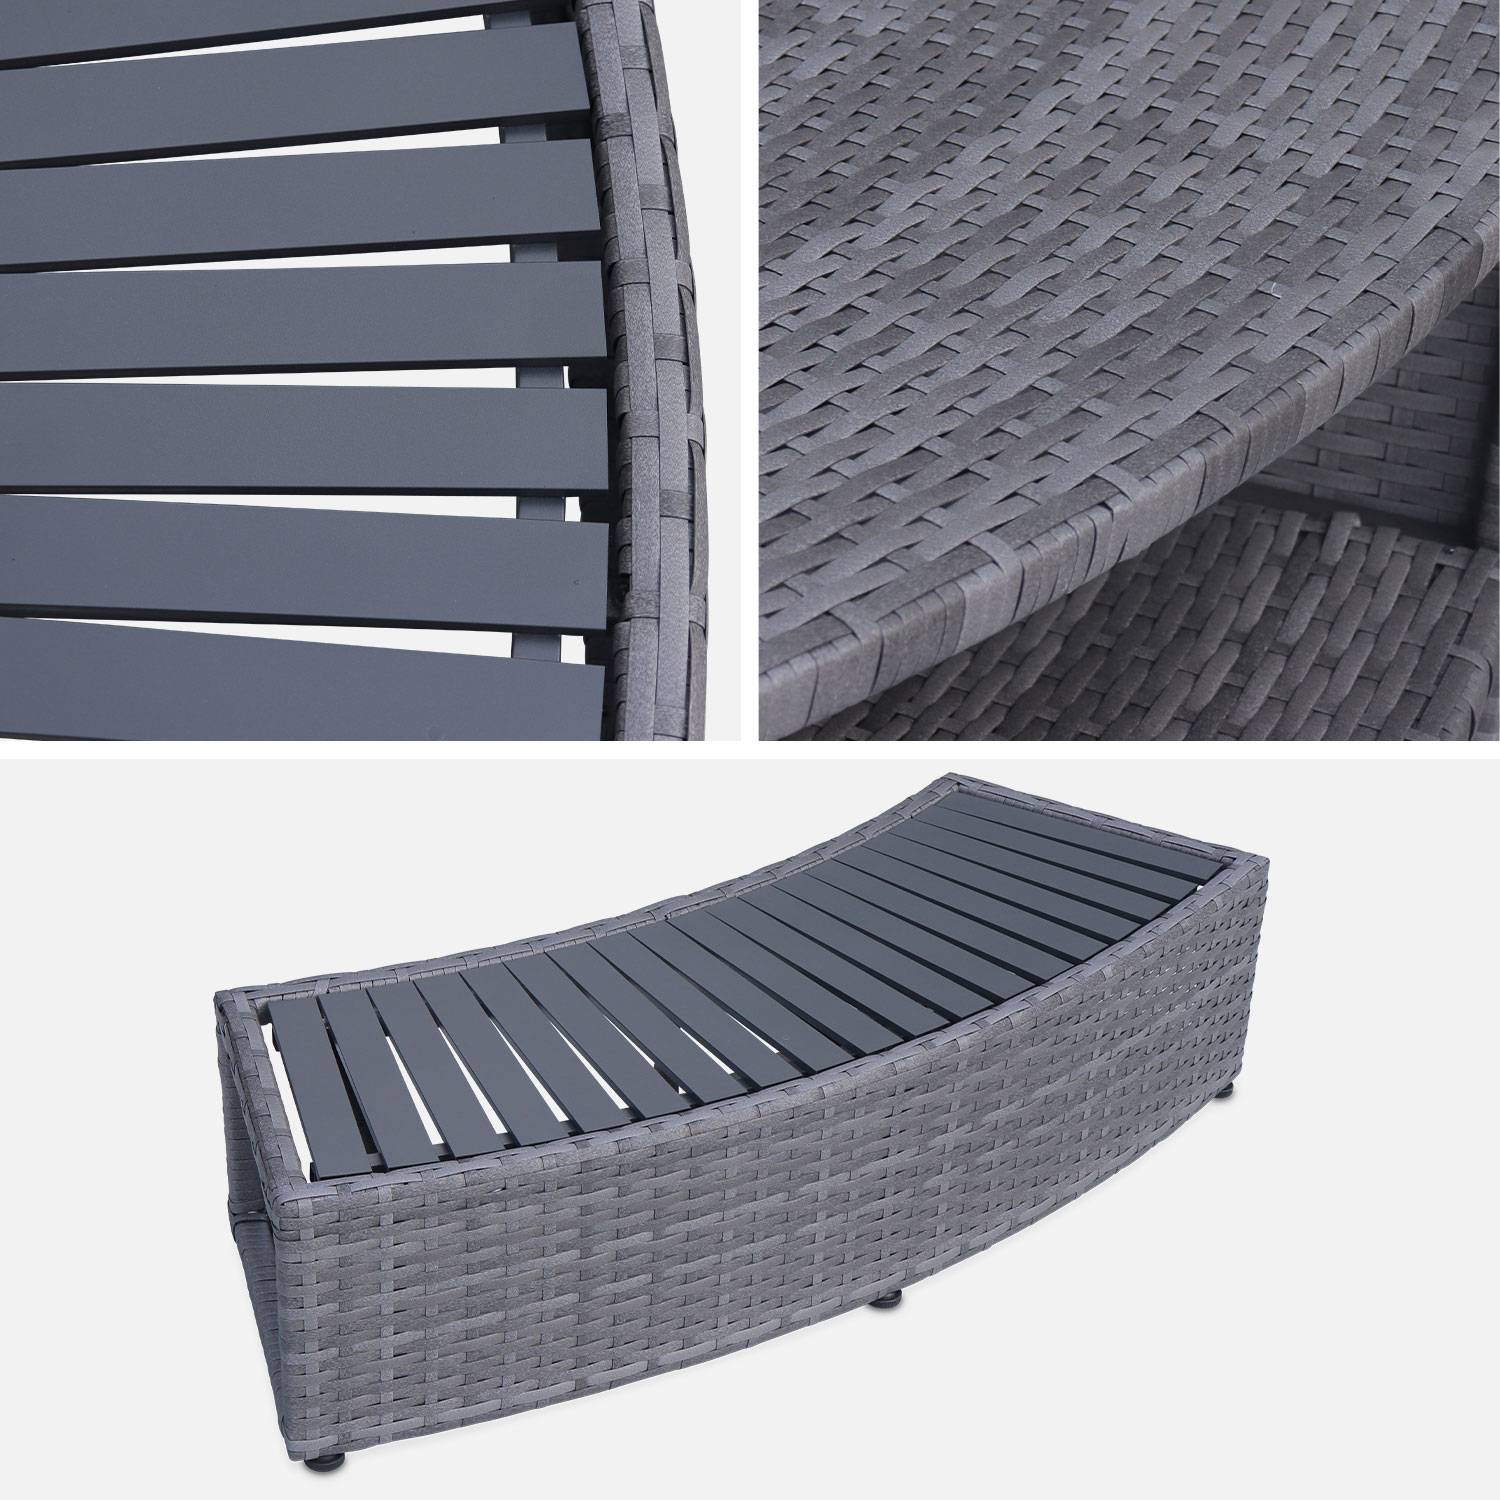 Grey polyrattan for hot tub surrond for 4 or 6 seater hot tub 180 x 70 cm - aluminium structure, shelves, cabinet and footstep Photo6